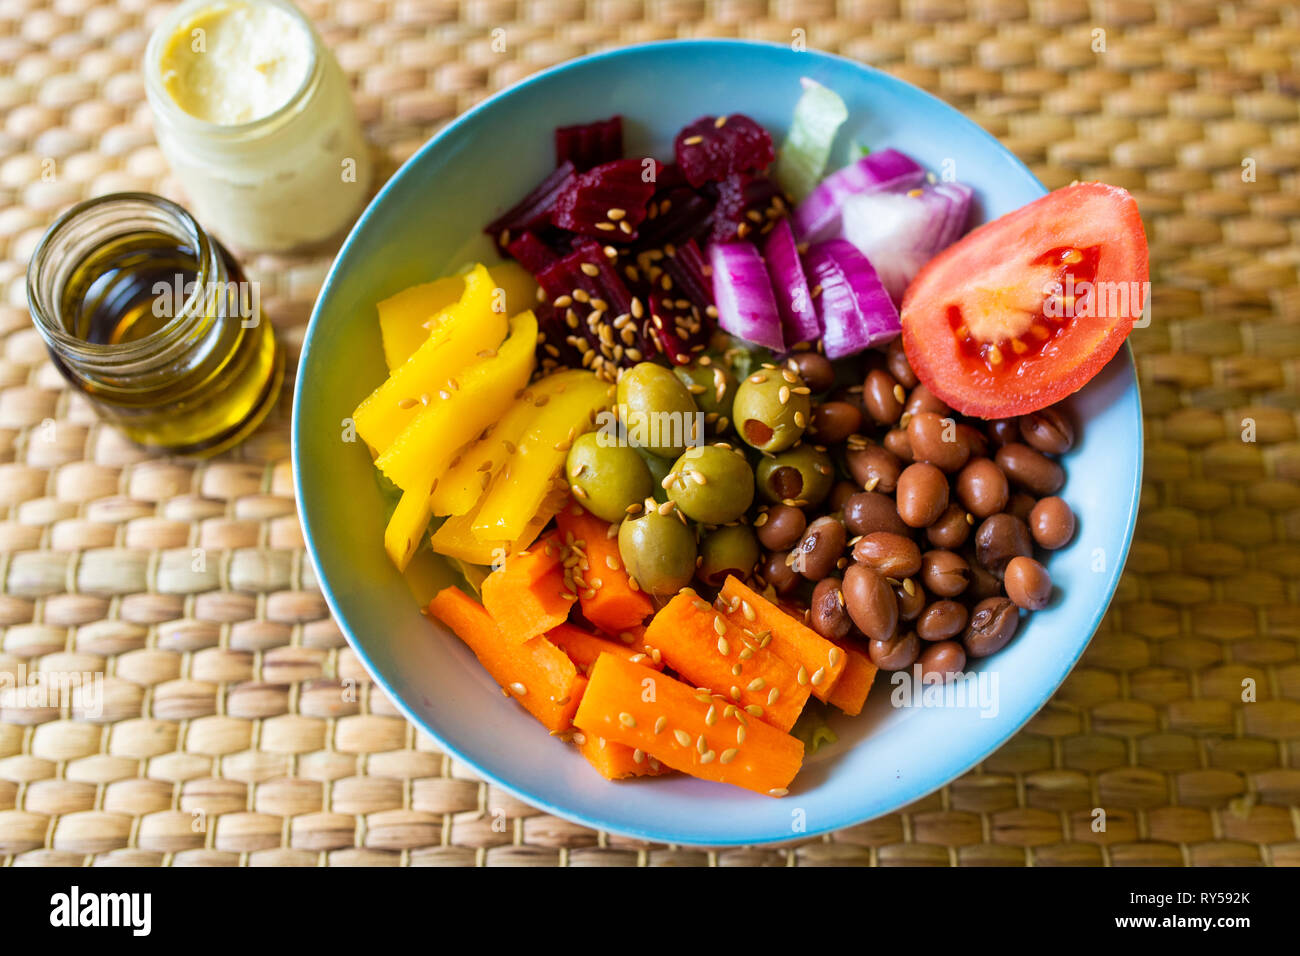 A vibrant vegan buddha bowl filled with colourful vegetables and pulses Stock Photo